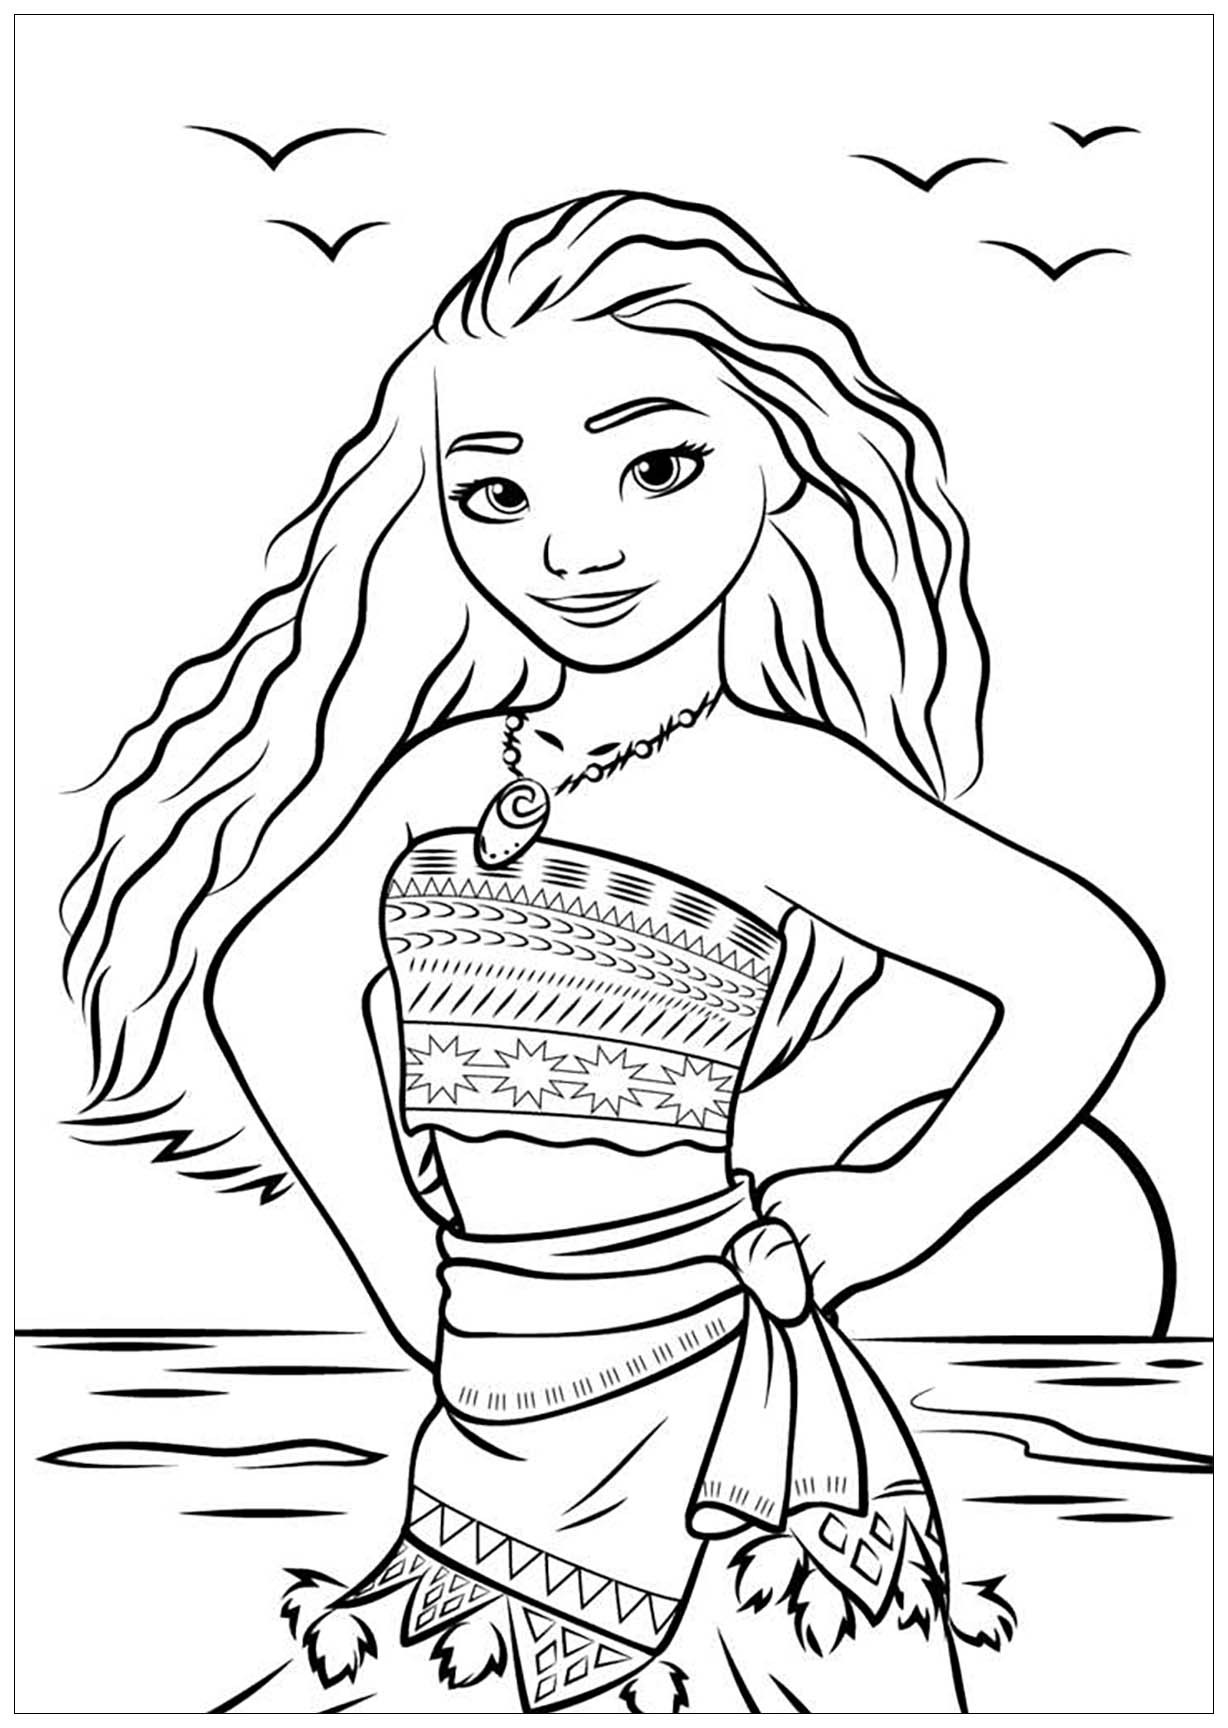 Moana Coloring Pages Printable
 Moana to print for free Moana Kids Coloring Pages